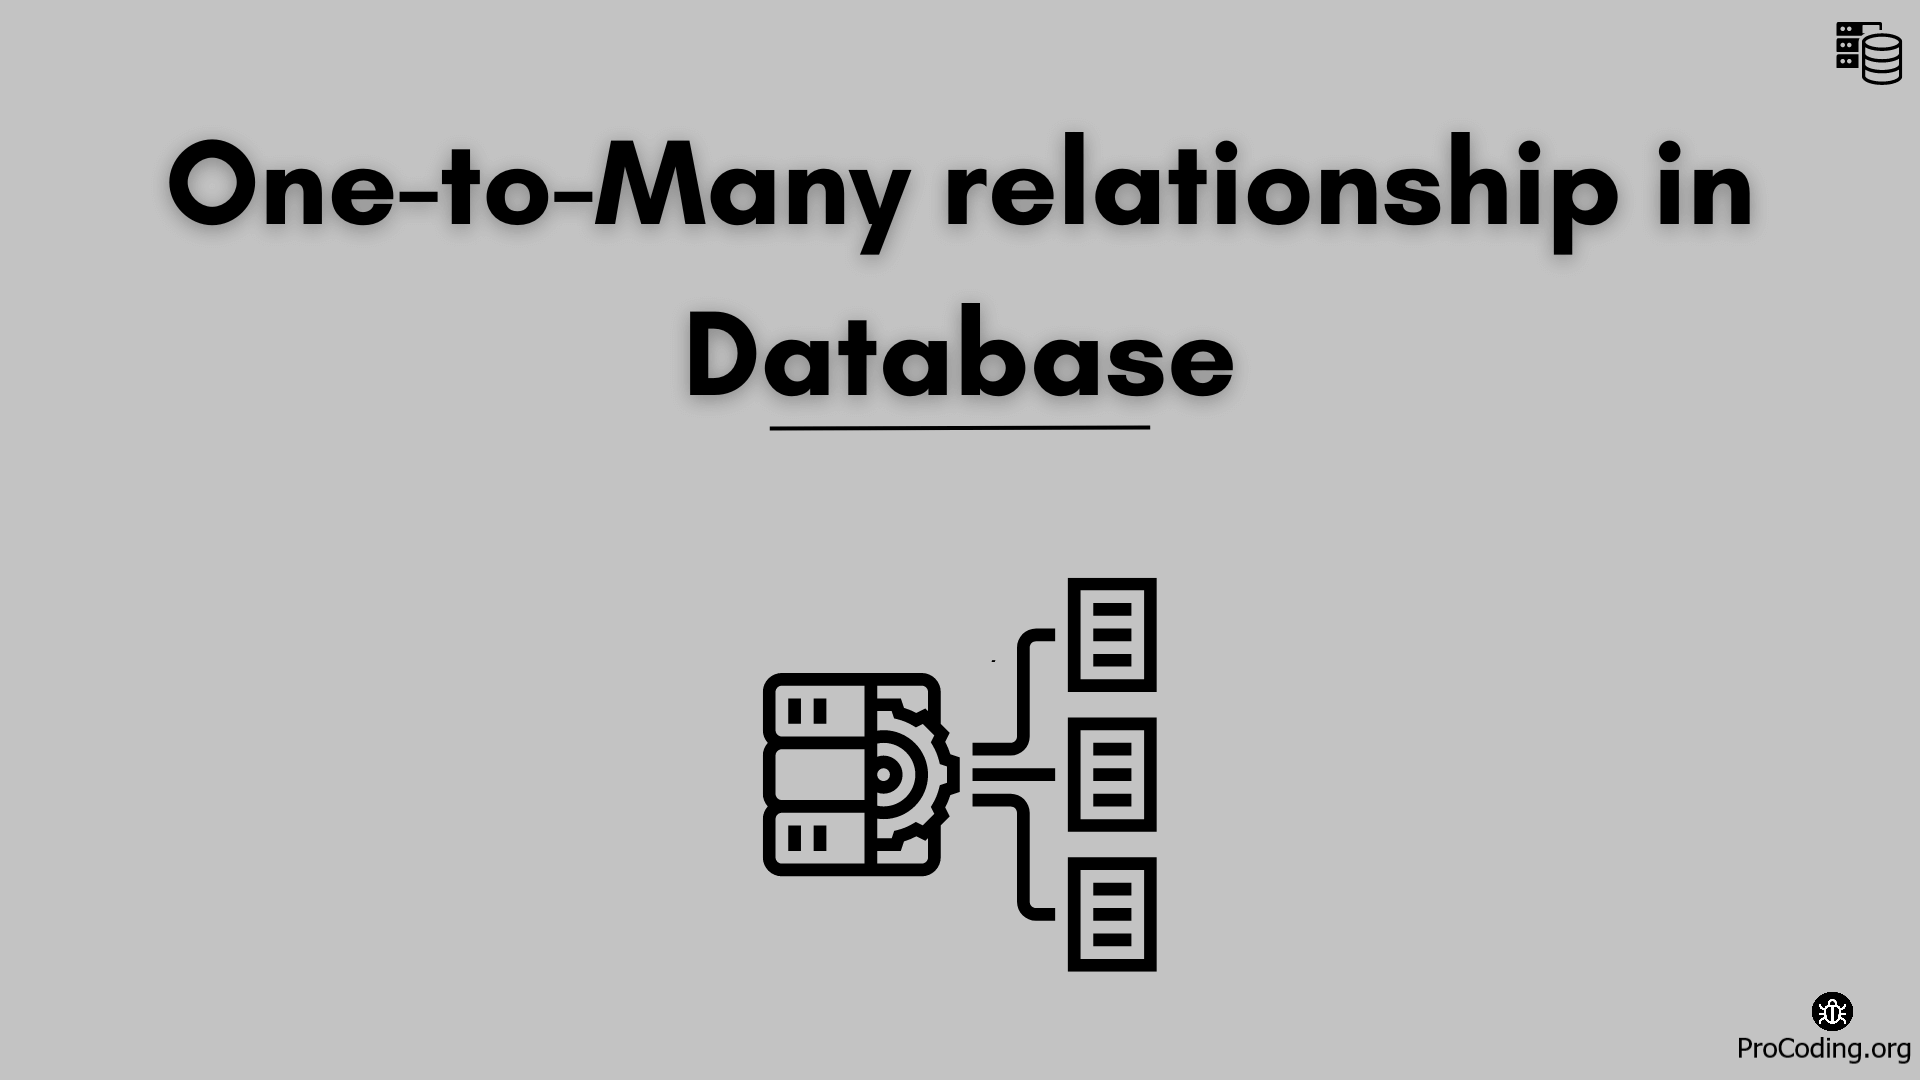 One-to-Many relationship in Database